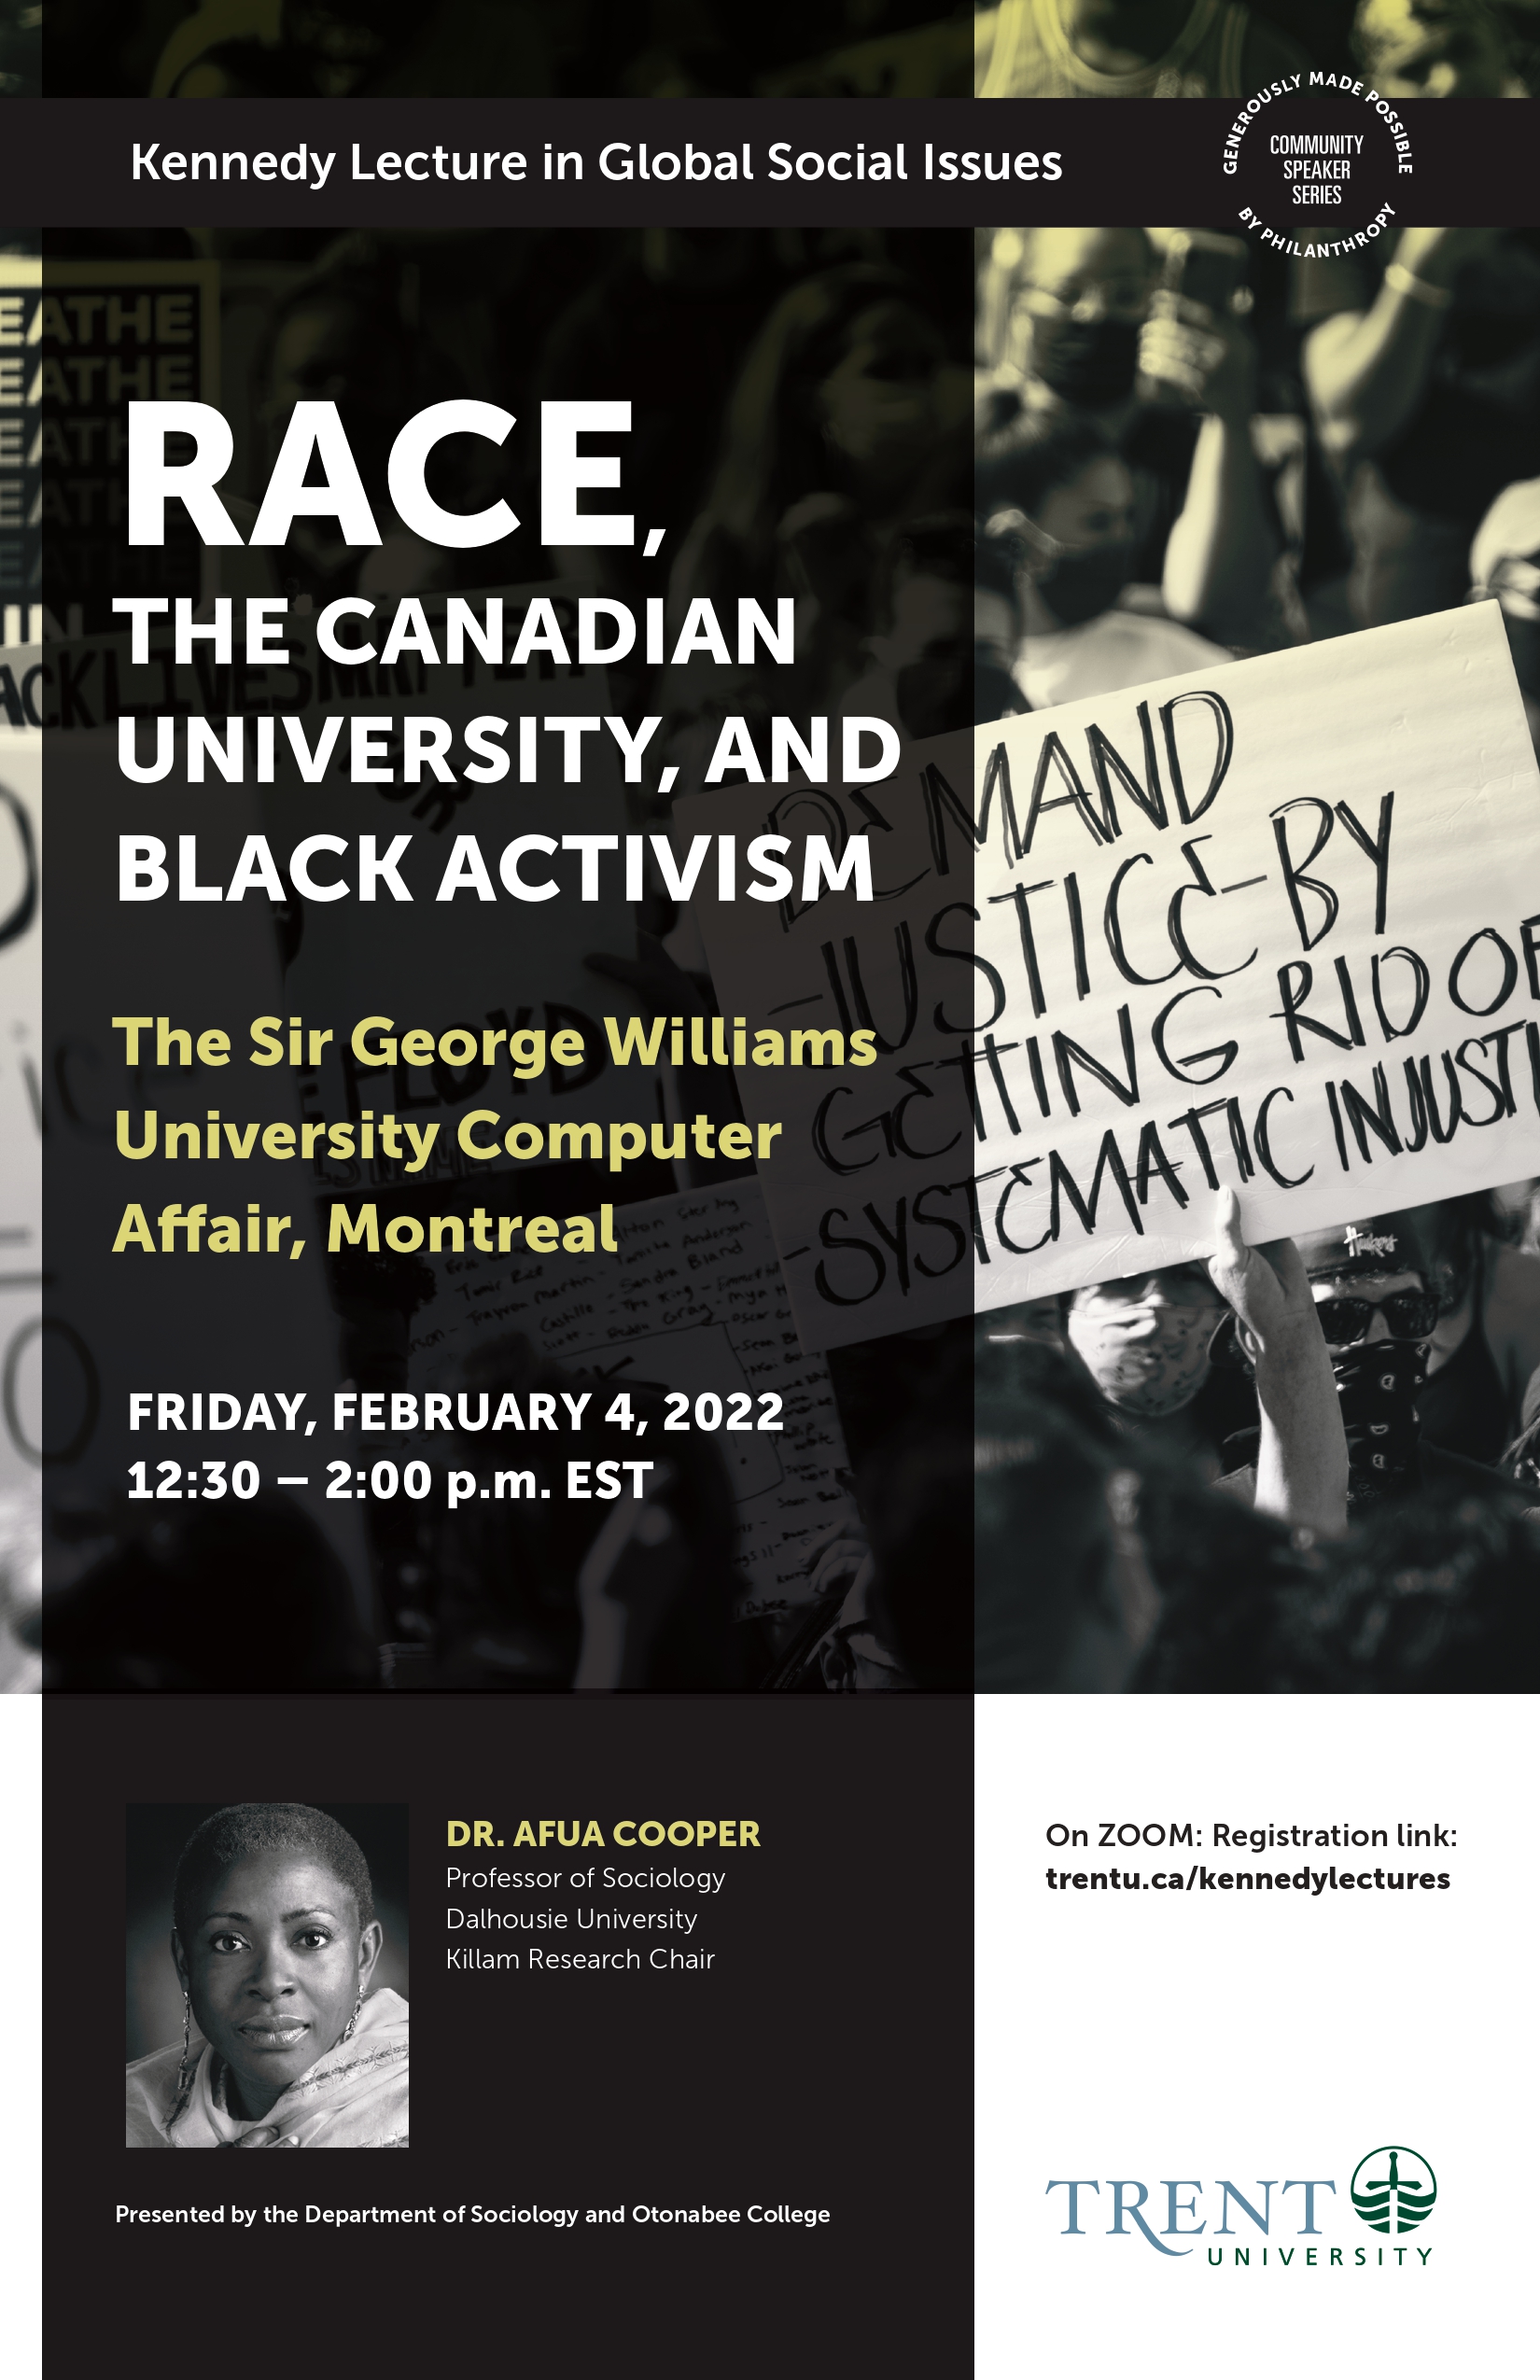 Kennedy Lecture 2020 Poster